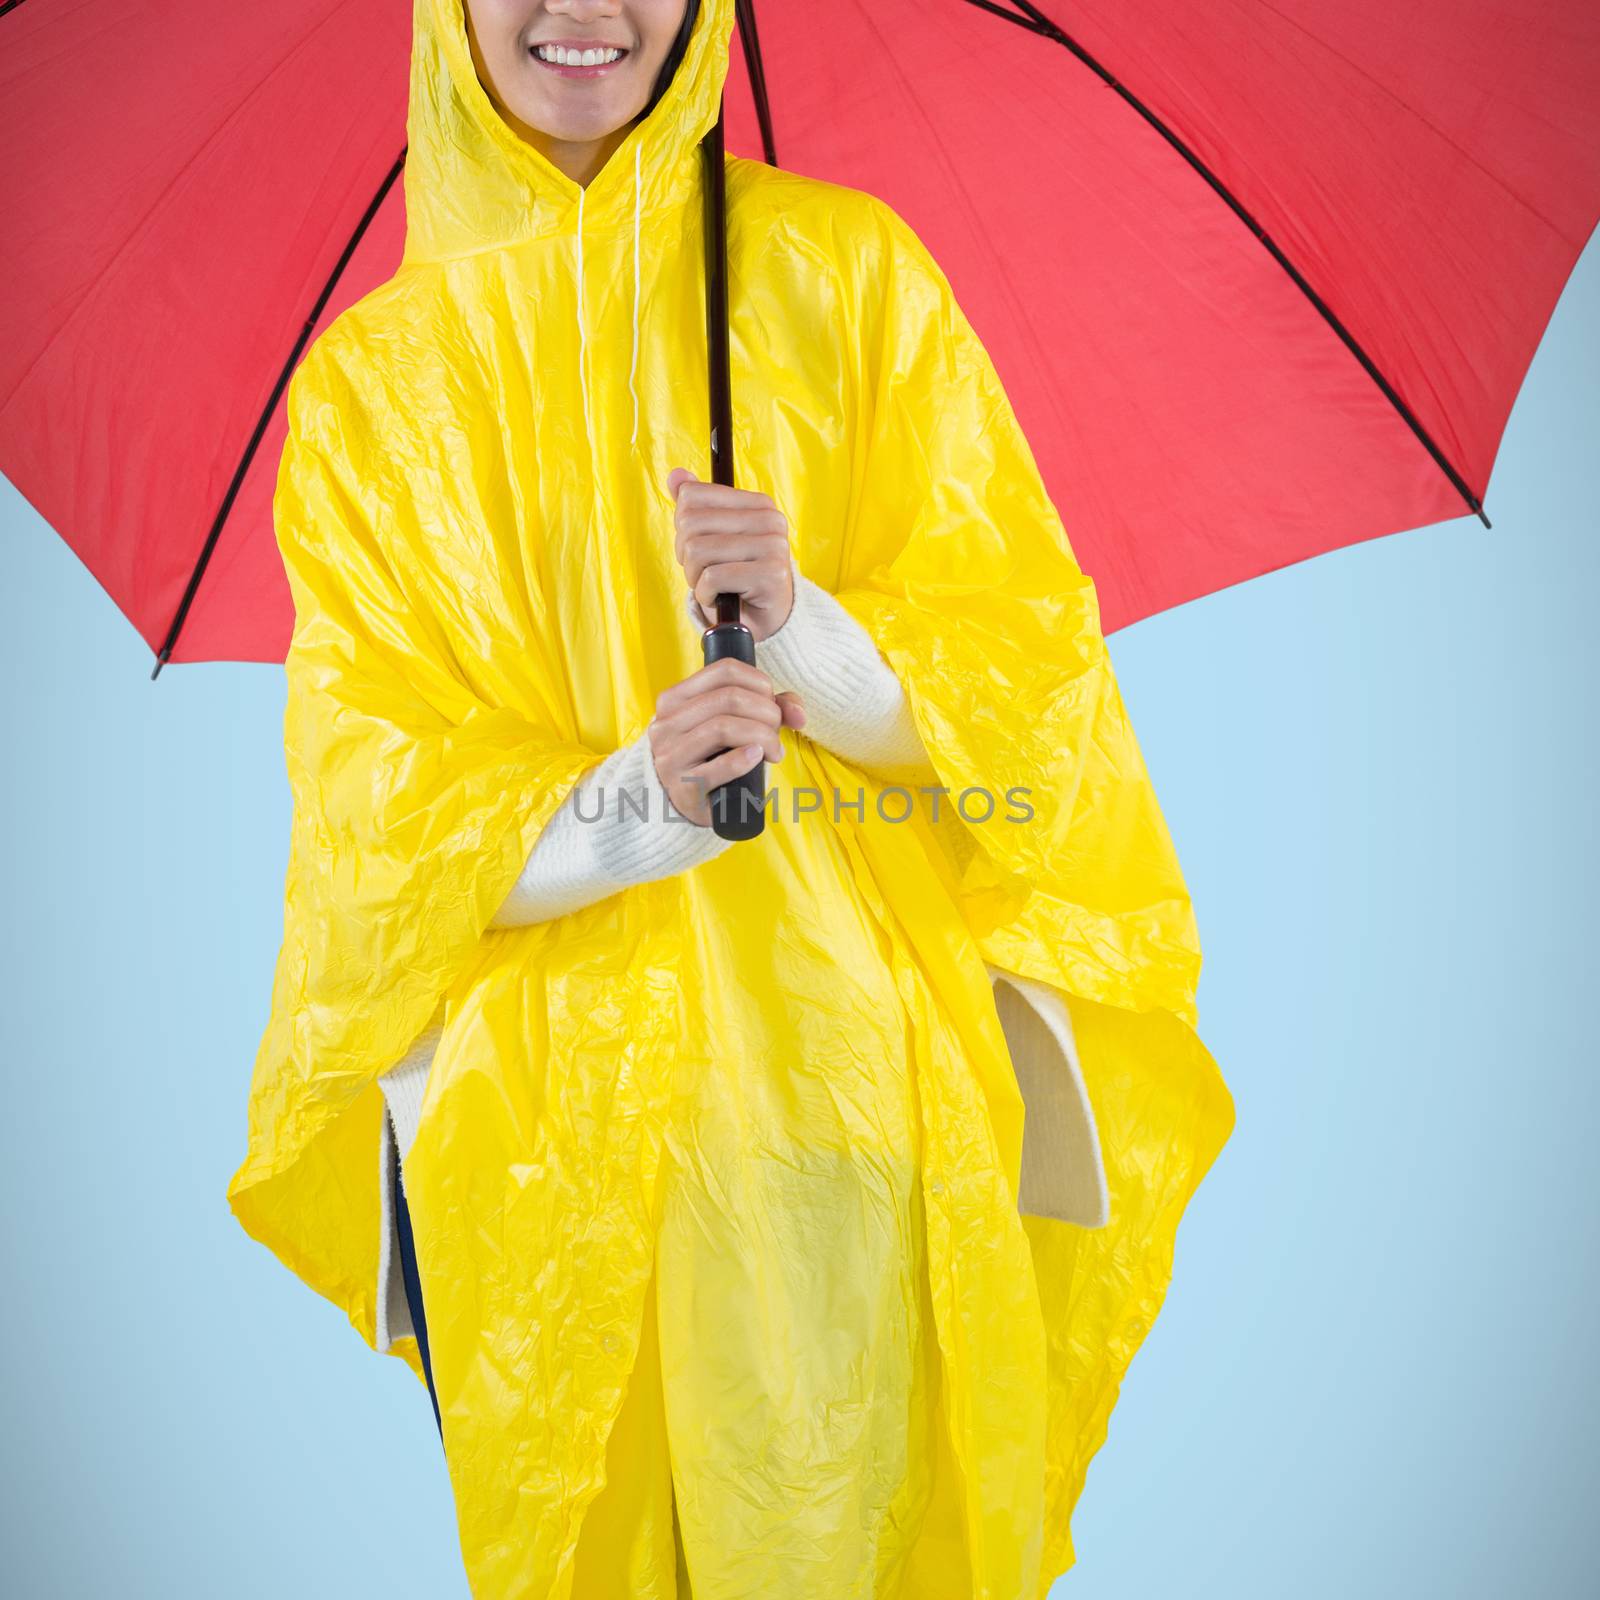 Woman in yellow raincoat holding an umbrella against blue background